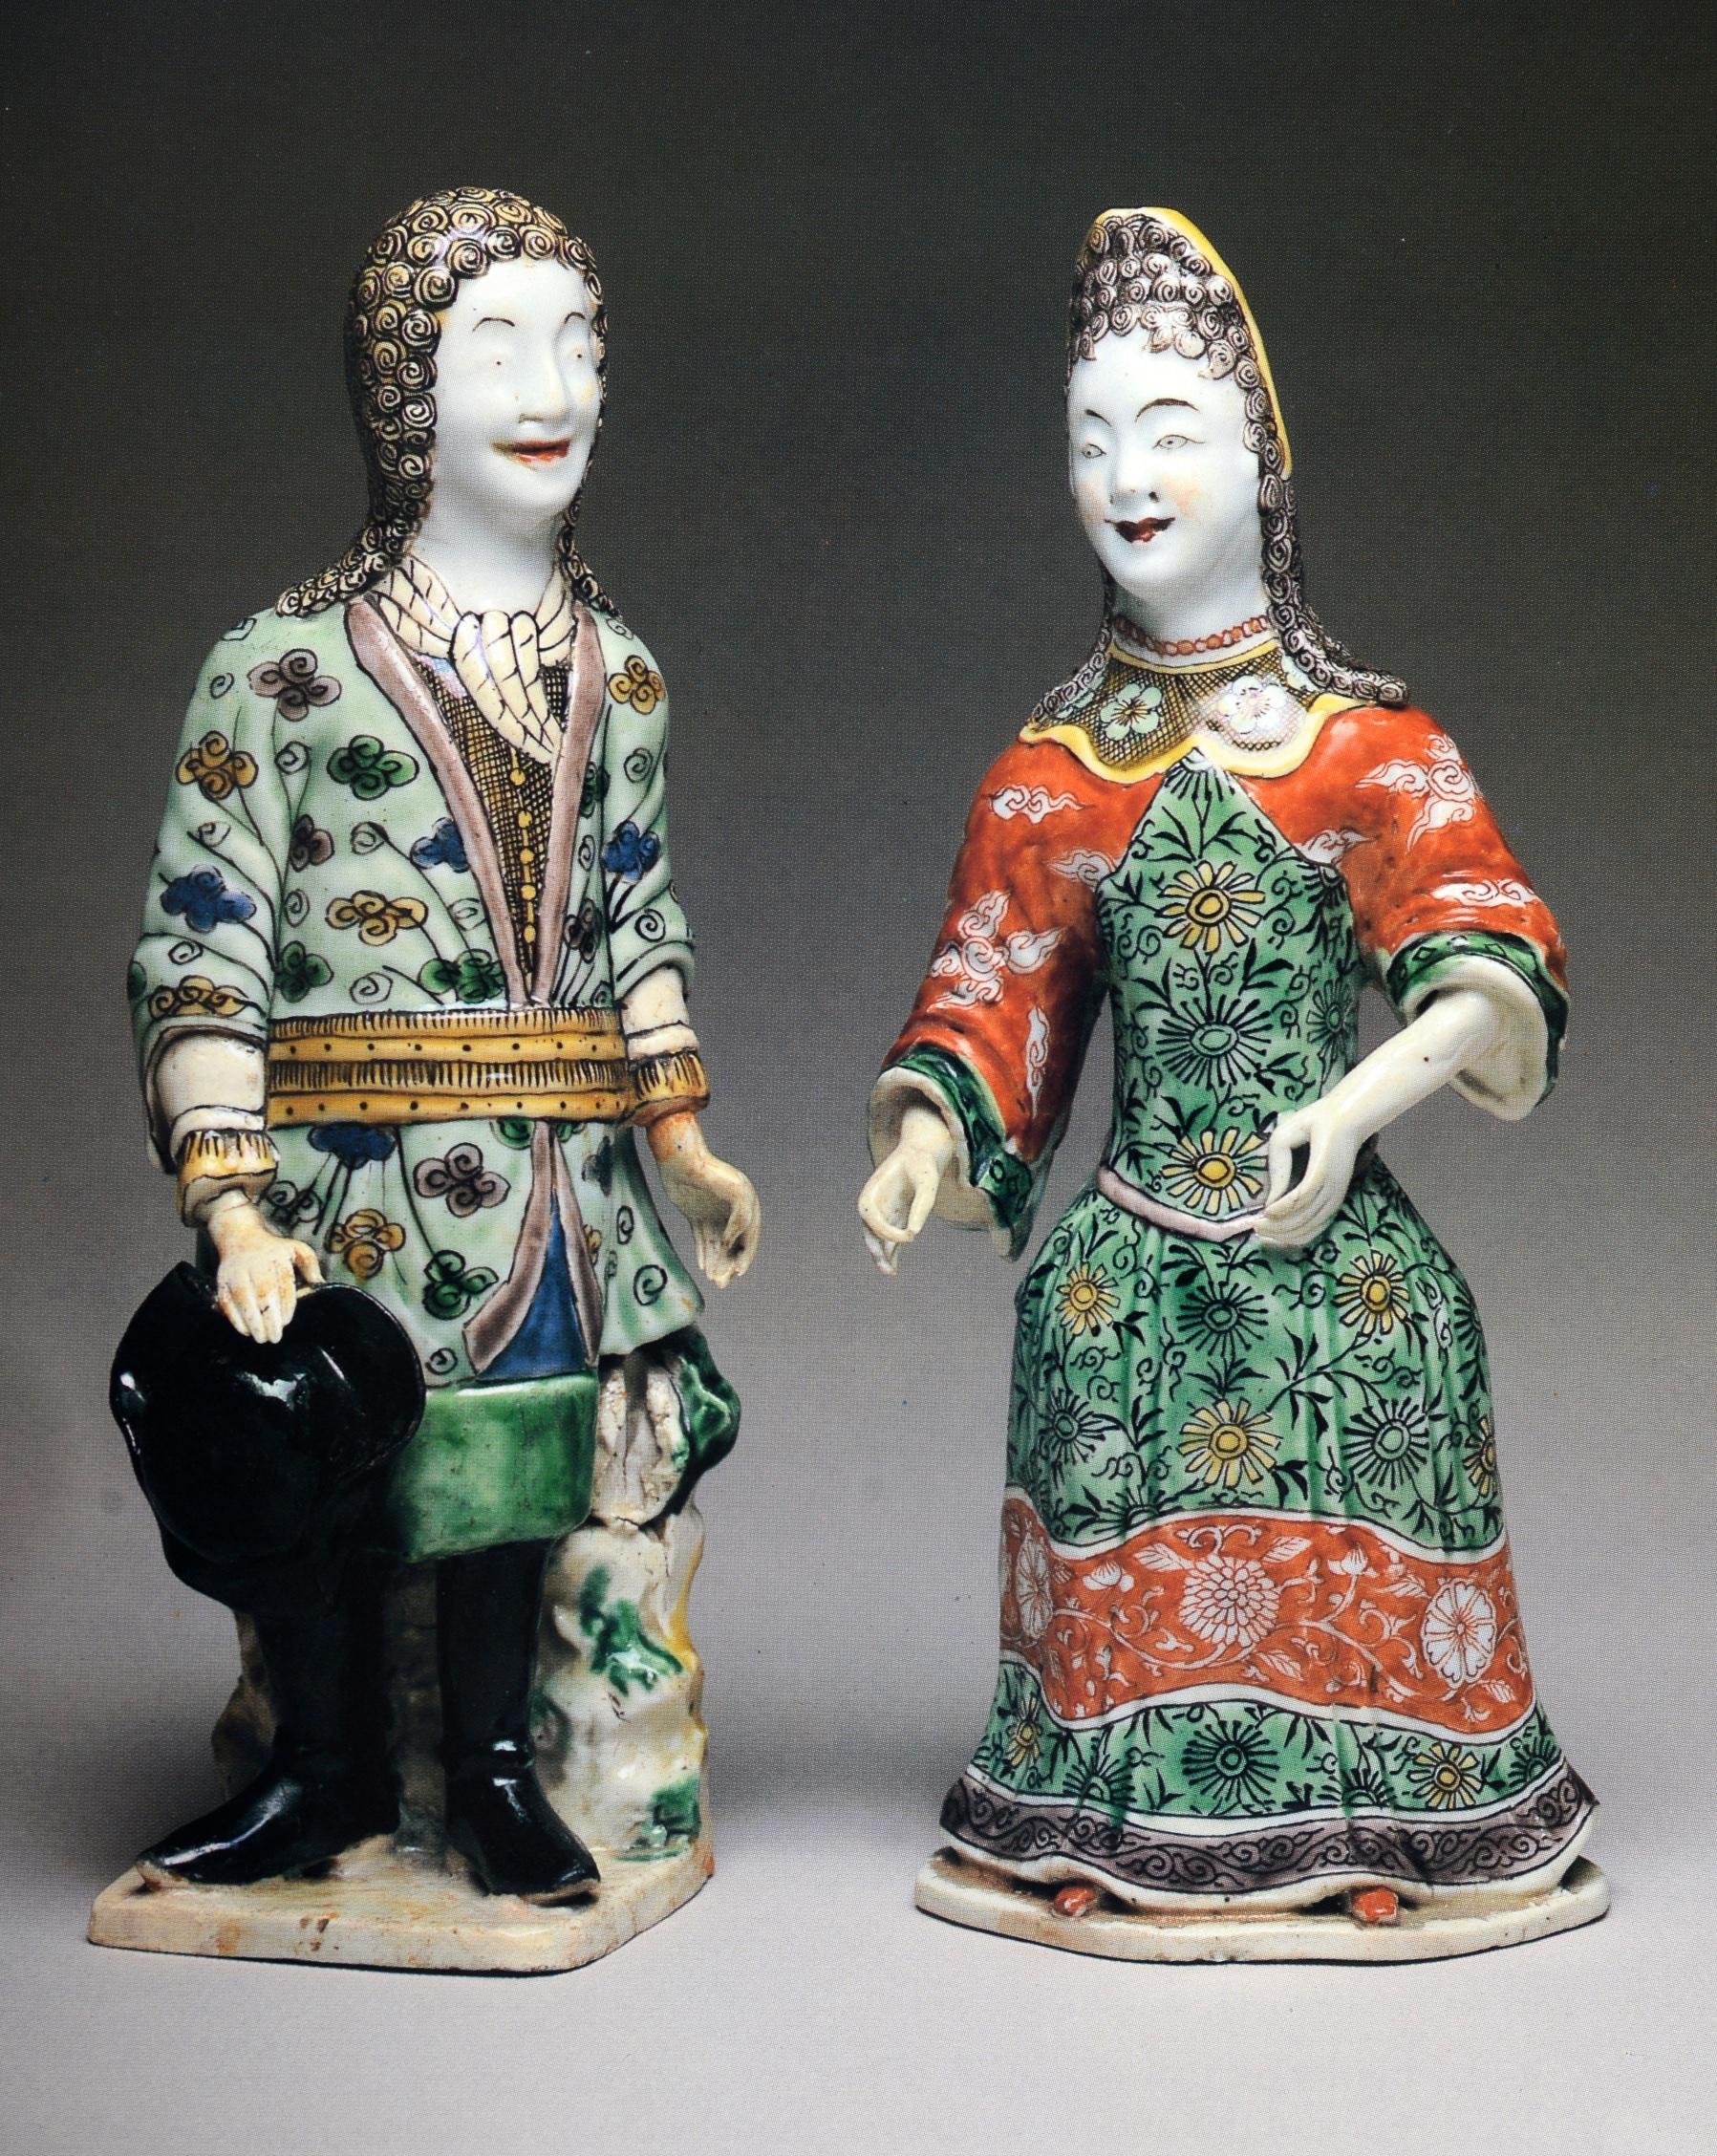 Late 20th Century Important Chinese Export Porcelain Mottahedeh Collection Auction Catalog, 1985